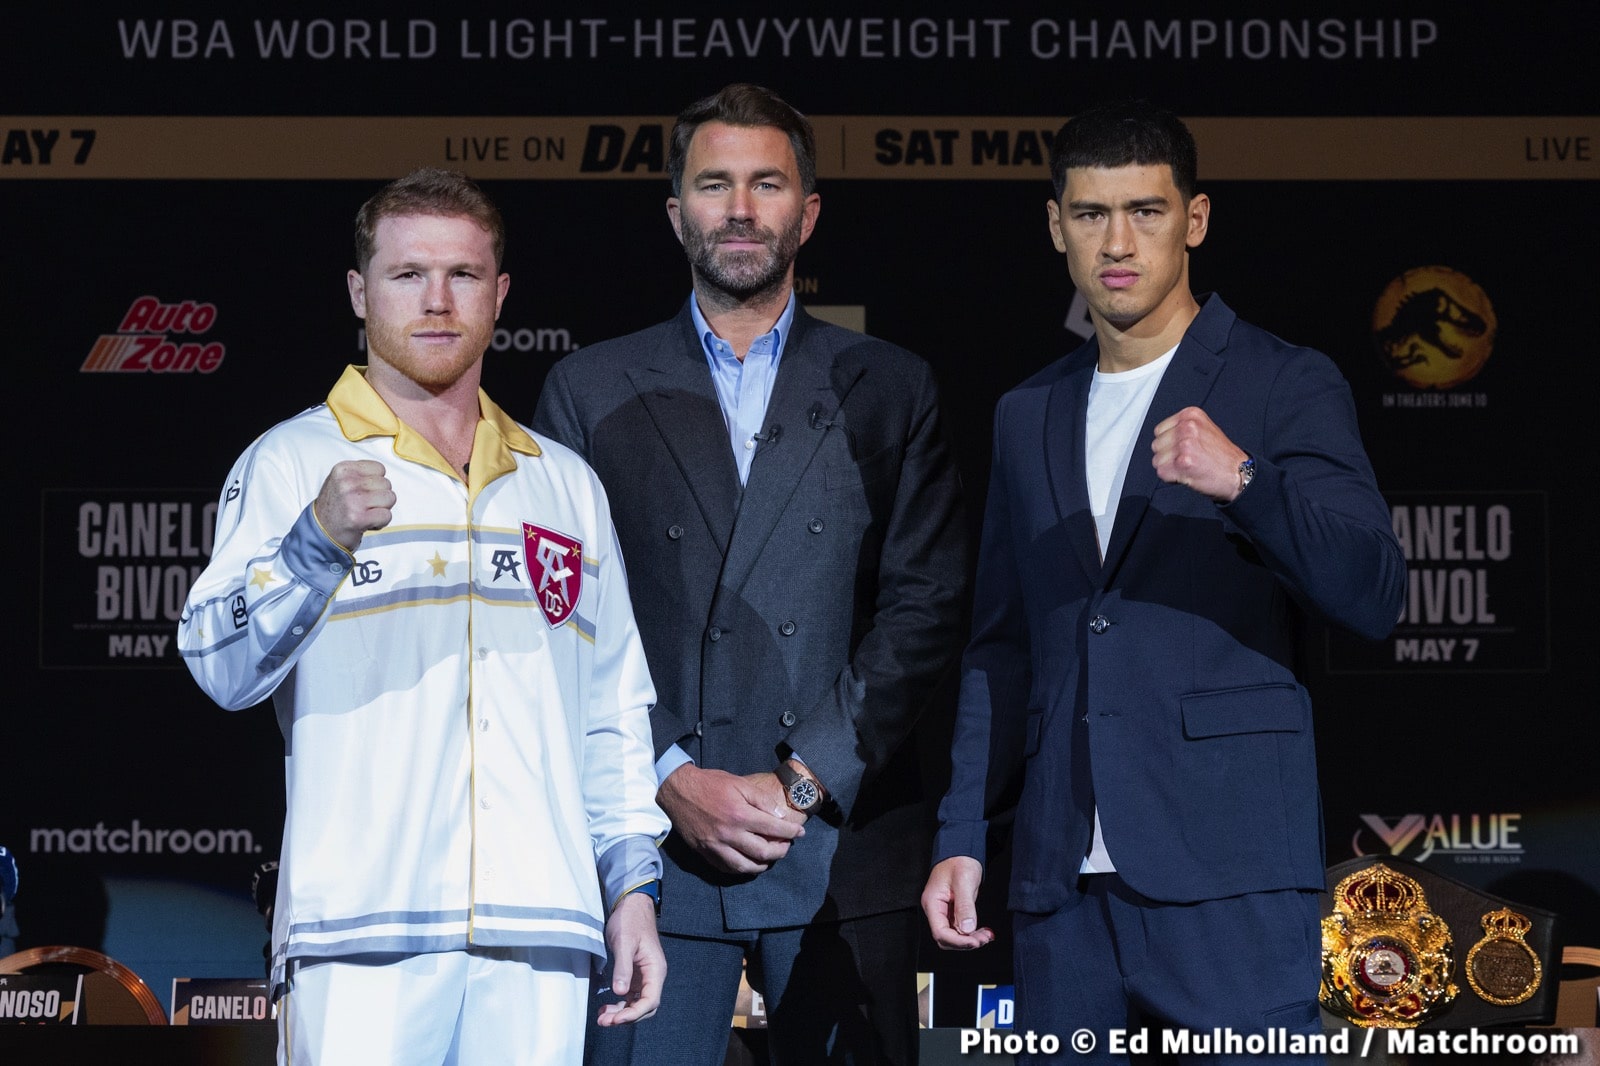 Image: Dmitry Bivol unconcerned about Canelo rematch in 2023